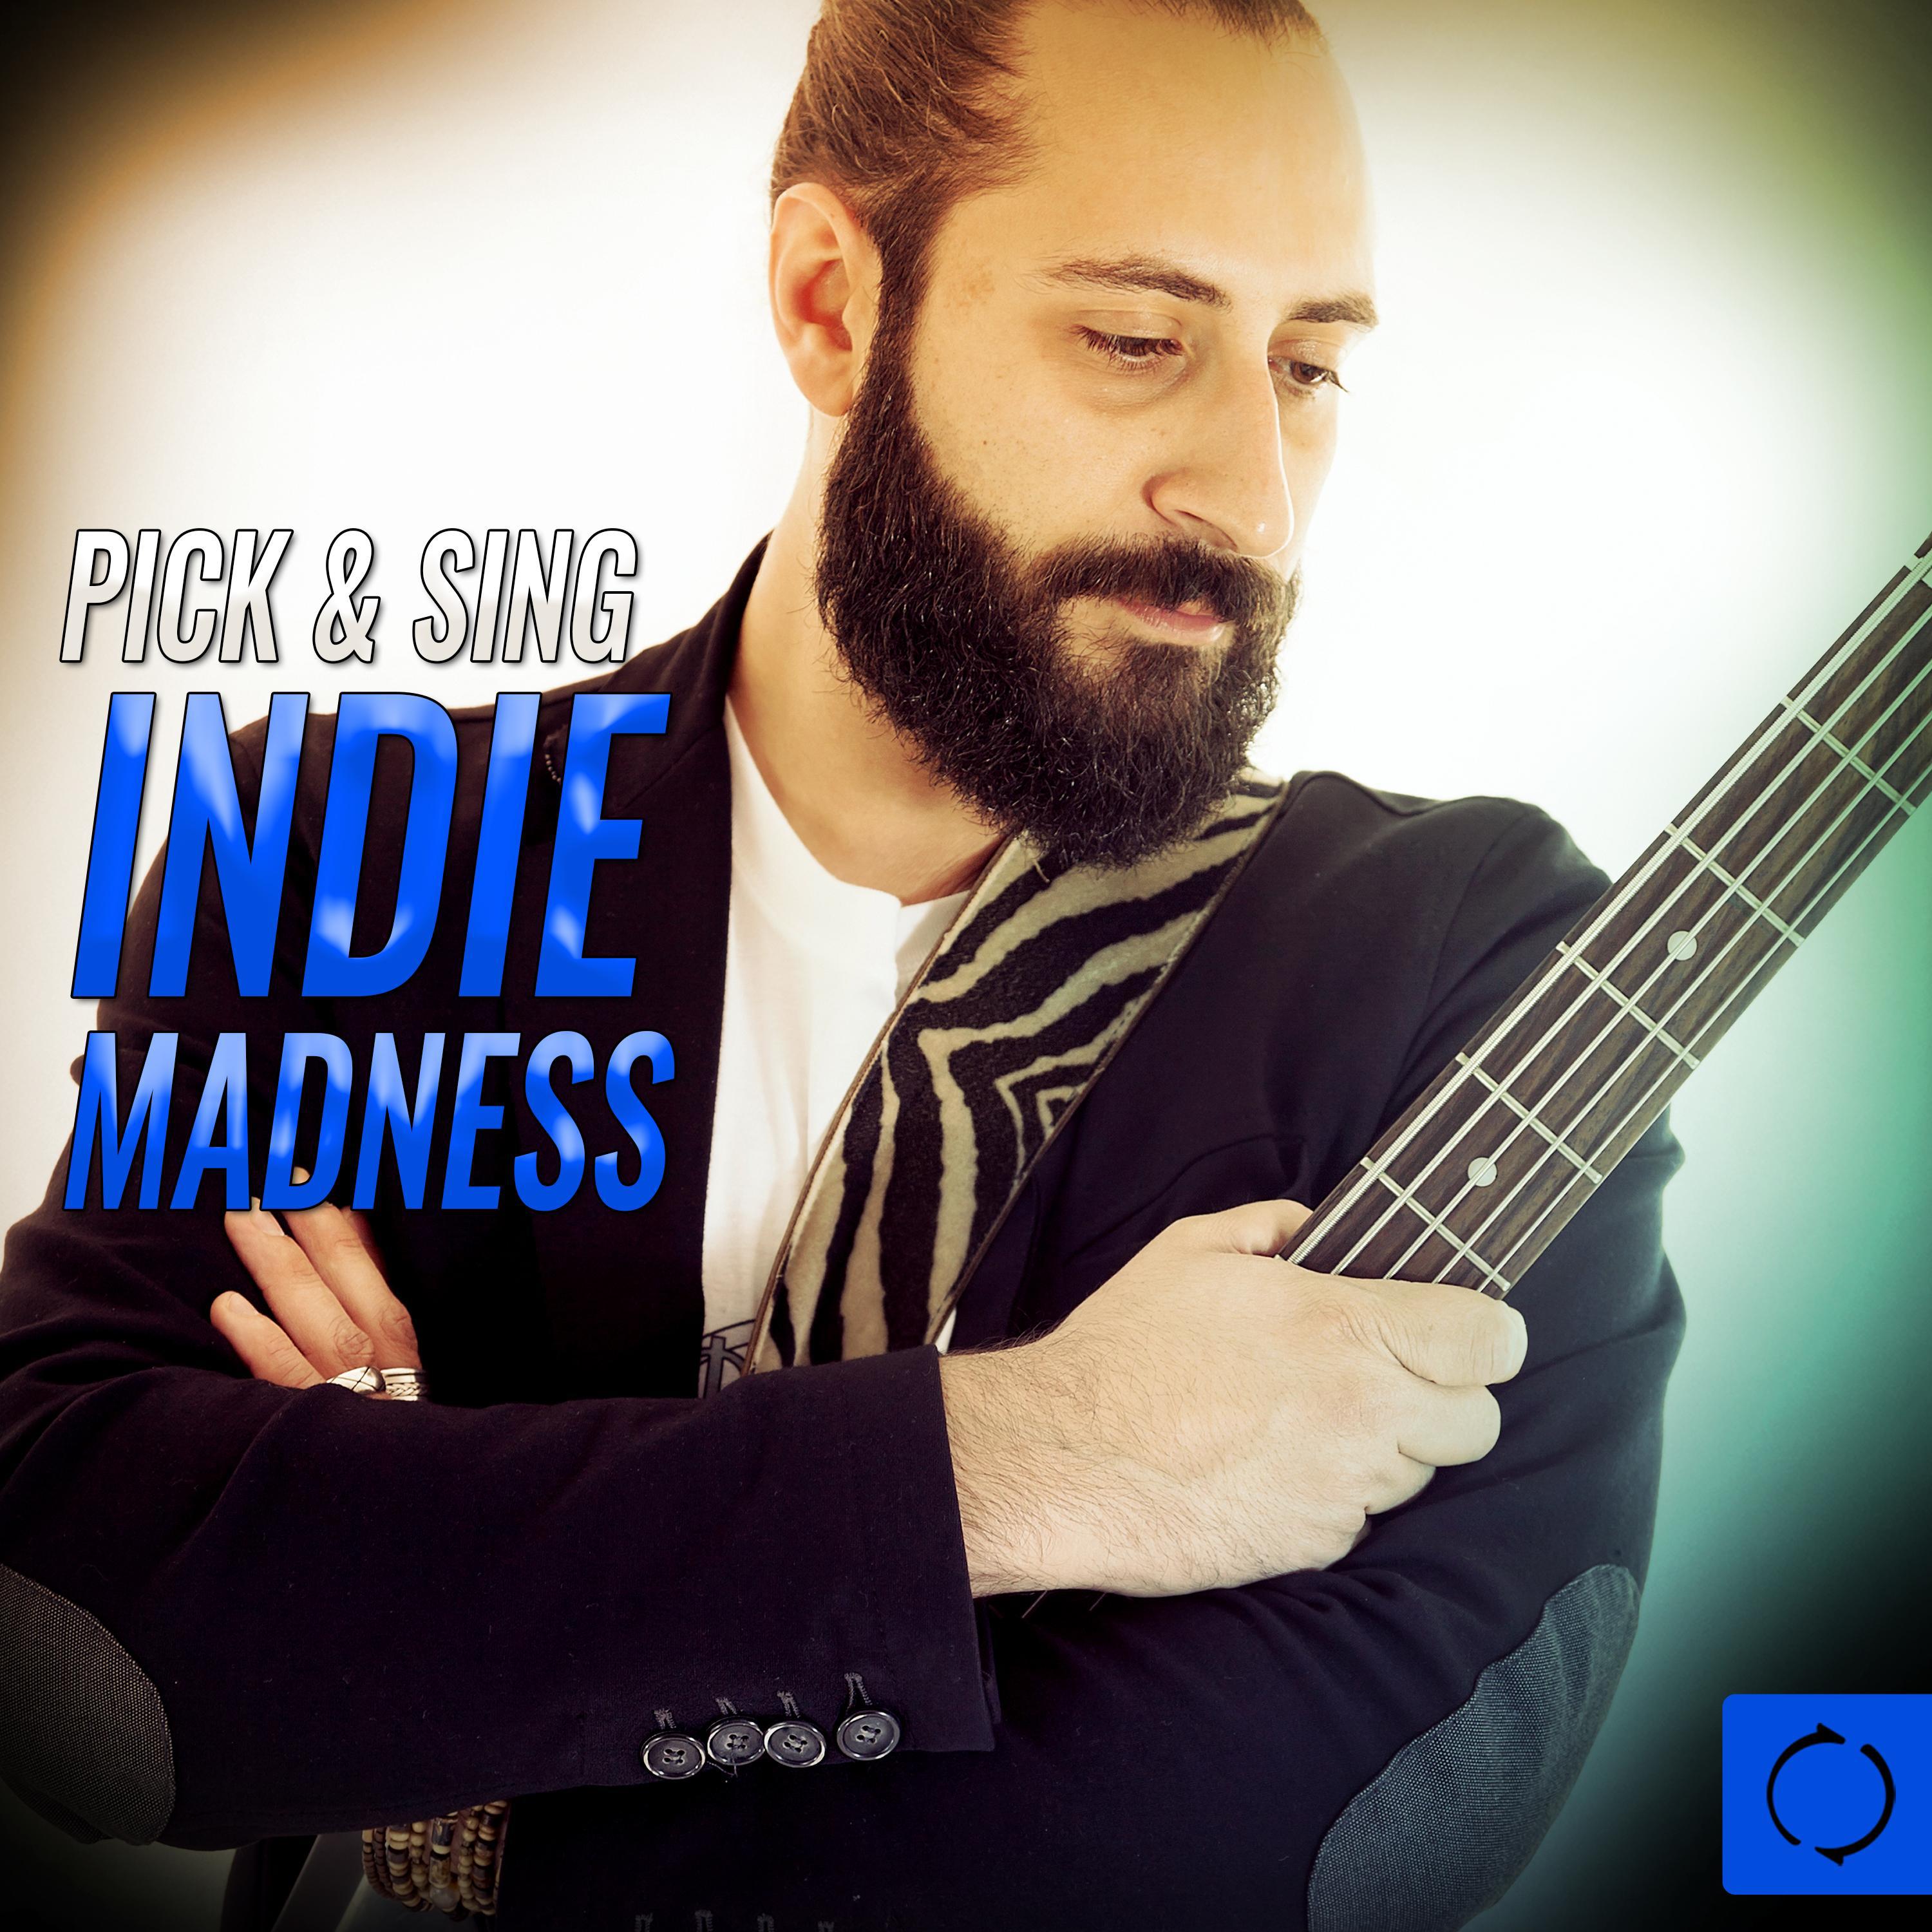 Pick & Sing Indie Madness